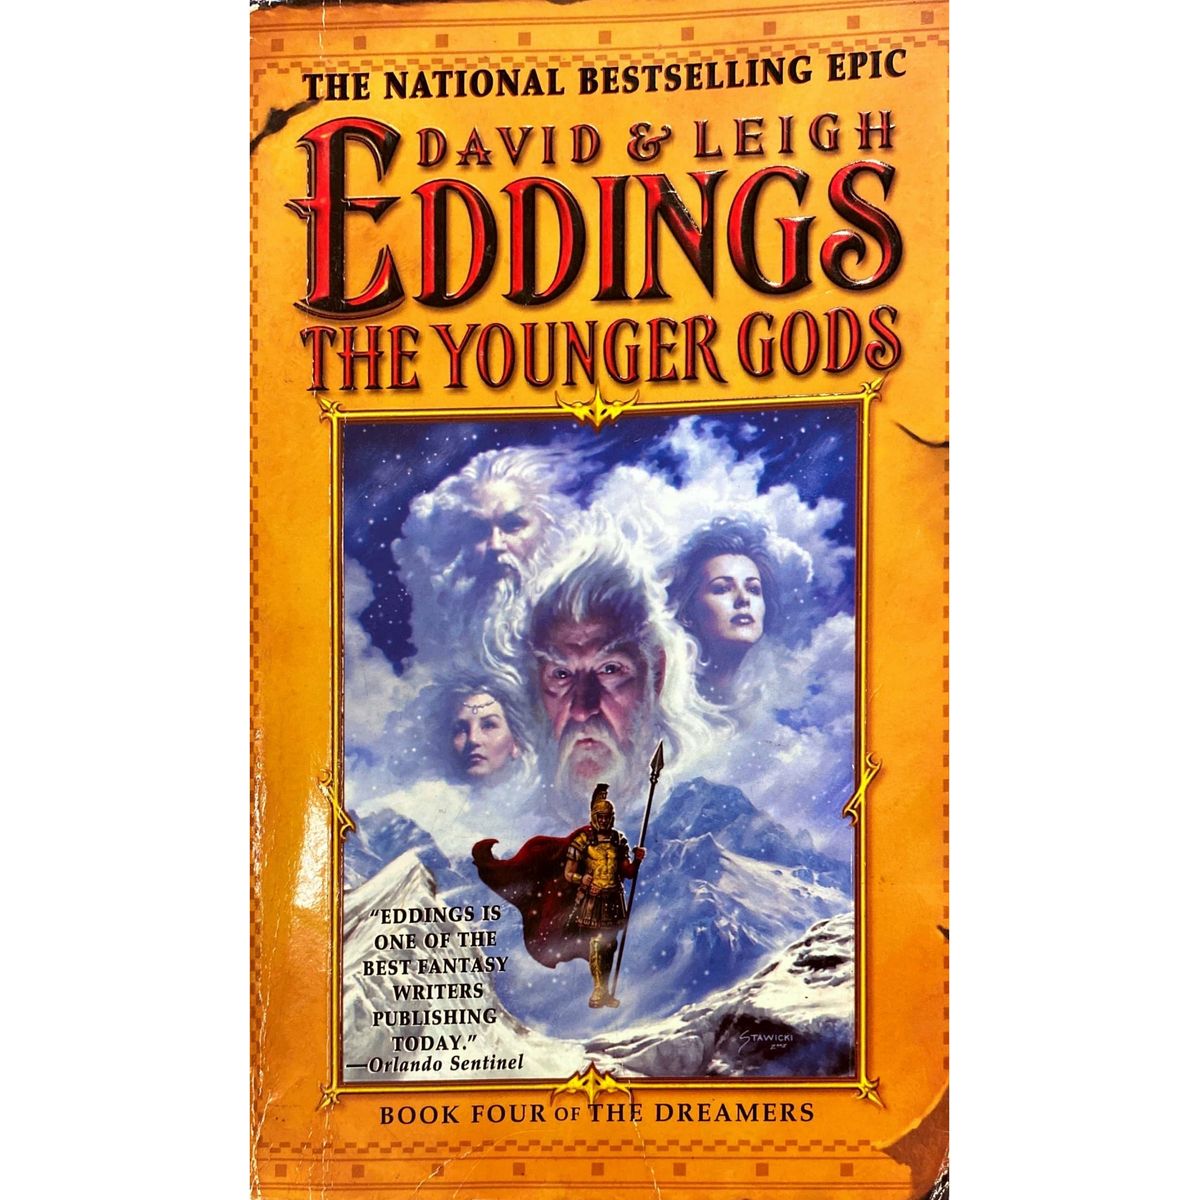 ISBN: 9780446613323 / 0446613320 - The Younger Gods by David & Leigh Eddings [2007]